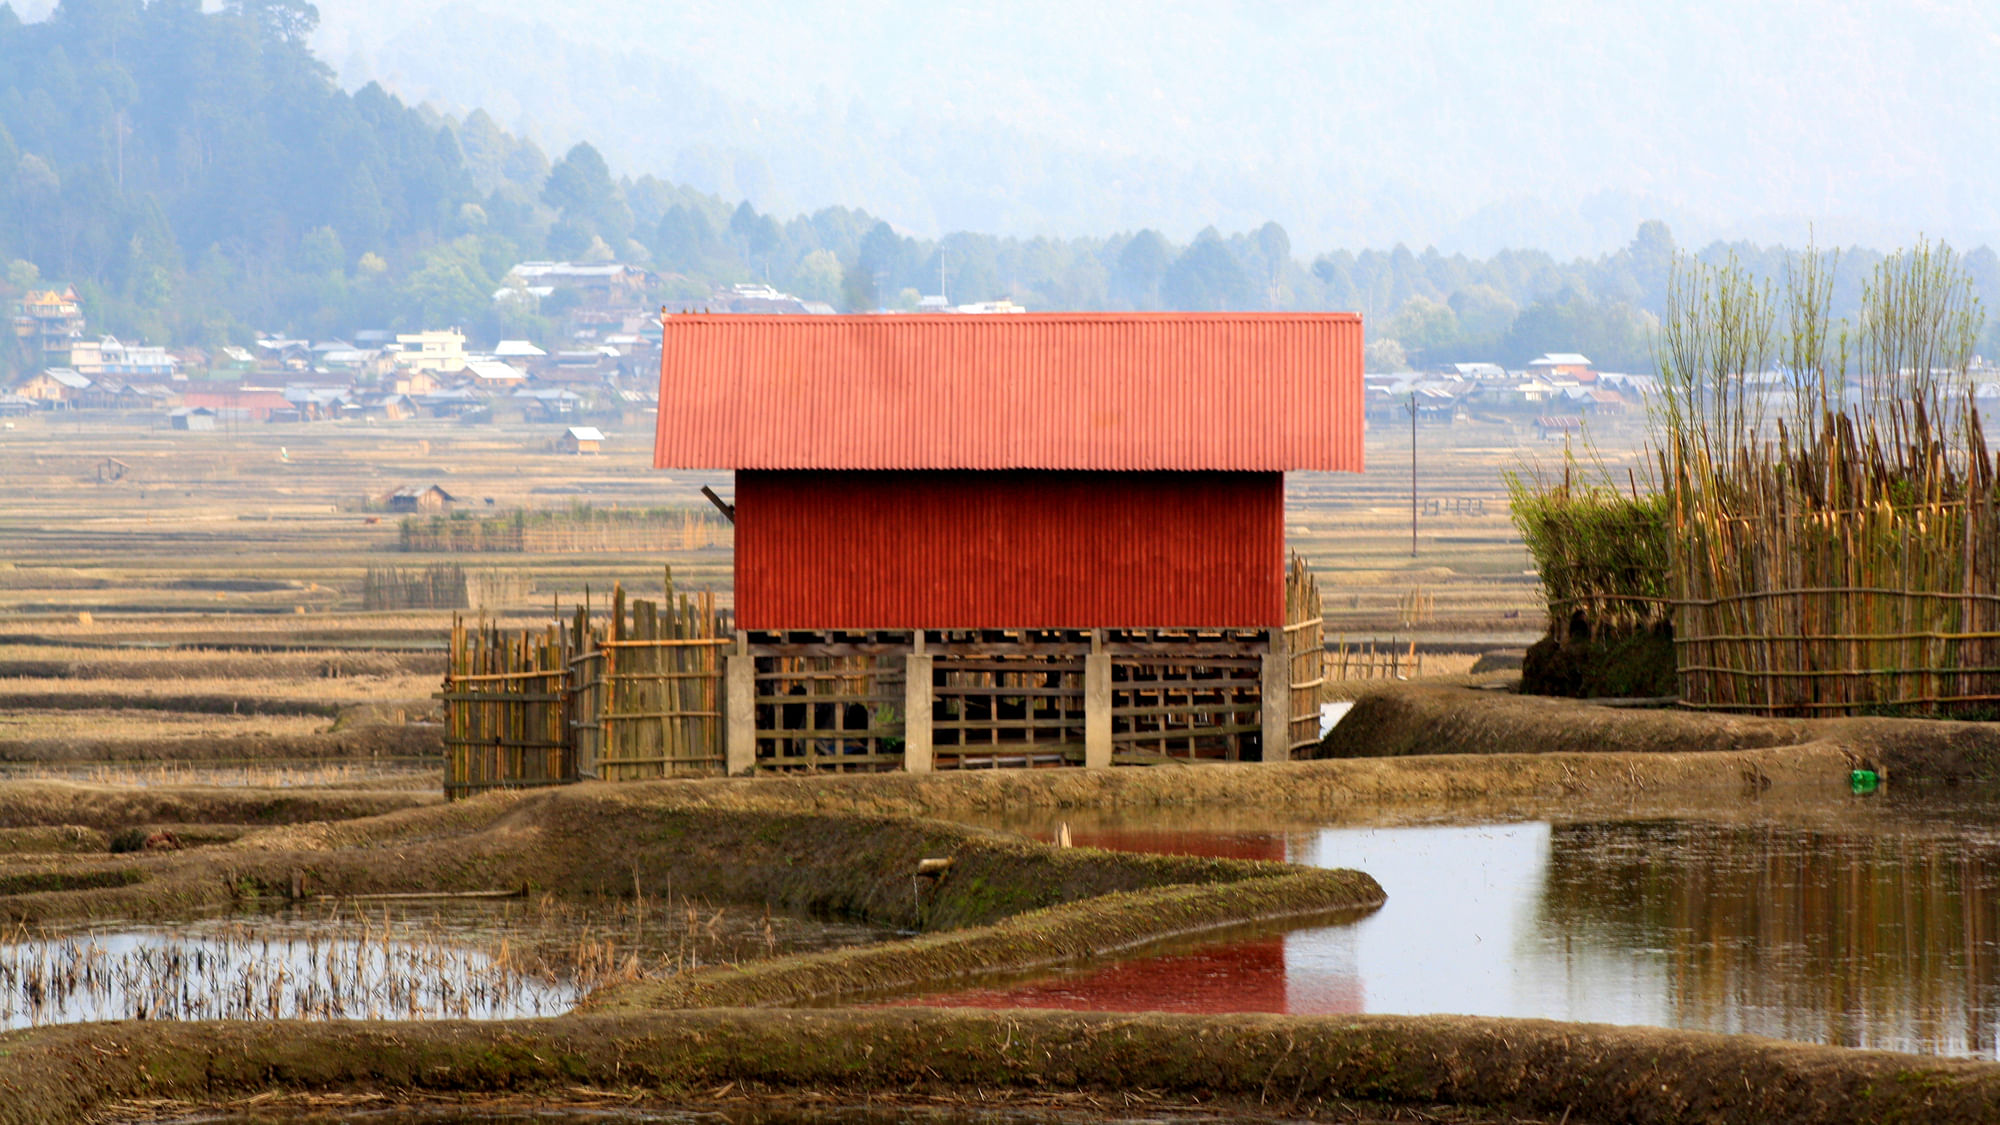 A bright red house amongst the paddy fields catches the eye. (Photo Courtesy: Kushal Chowdhury)